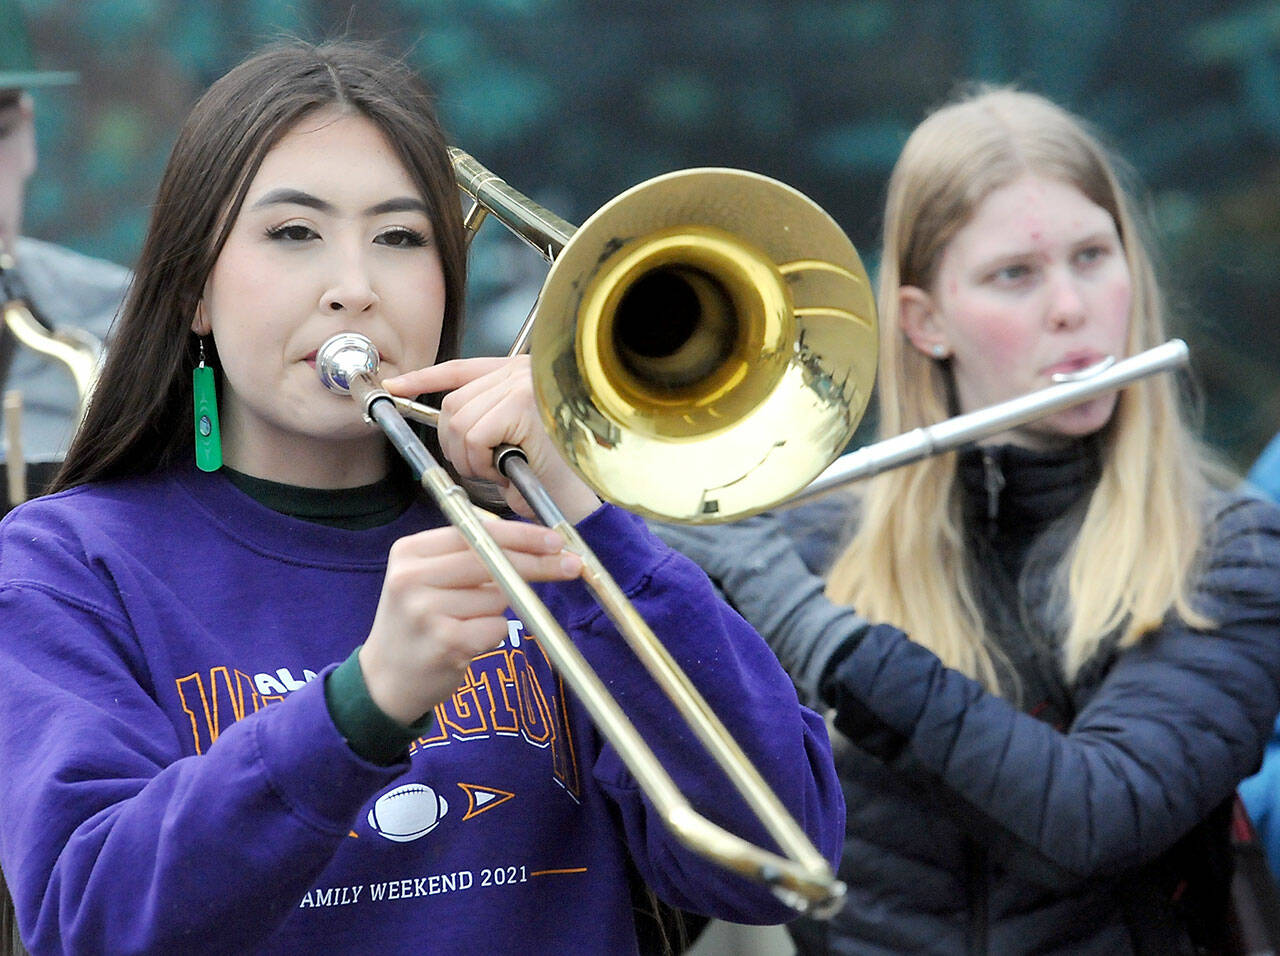 Port Angeles High School sophomore Danika Asgeirsson, 15, left, and young Madeline Irwin, 16, perform with members of the school's band during a fundraising performance at the Conrad Dyar Memorial Fountain in downtown Port Angeles in February.  The band was accepting donations and selling bags of Rainshadow Roasters coffee to help pay for a performance with the school's choir and orchestra at Carnegie Hall in New York City on March 26.  (Keith Thorpe/Peninsula Daily News)